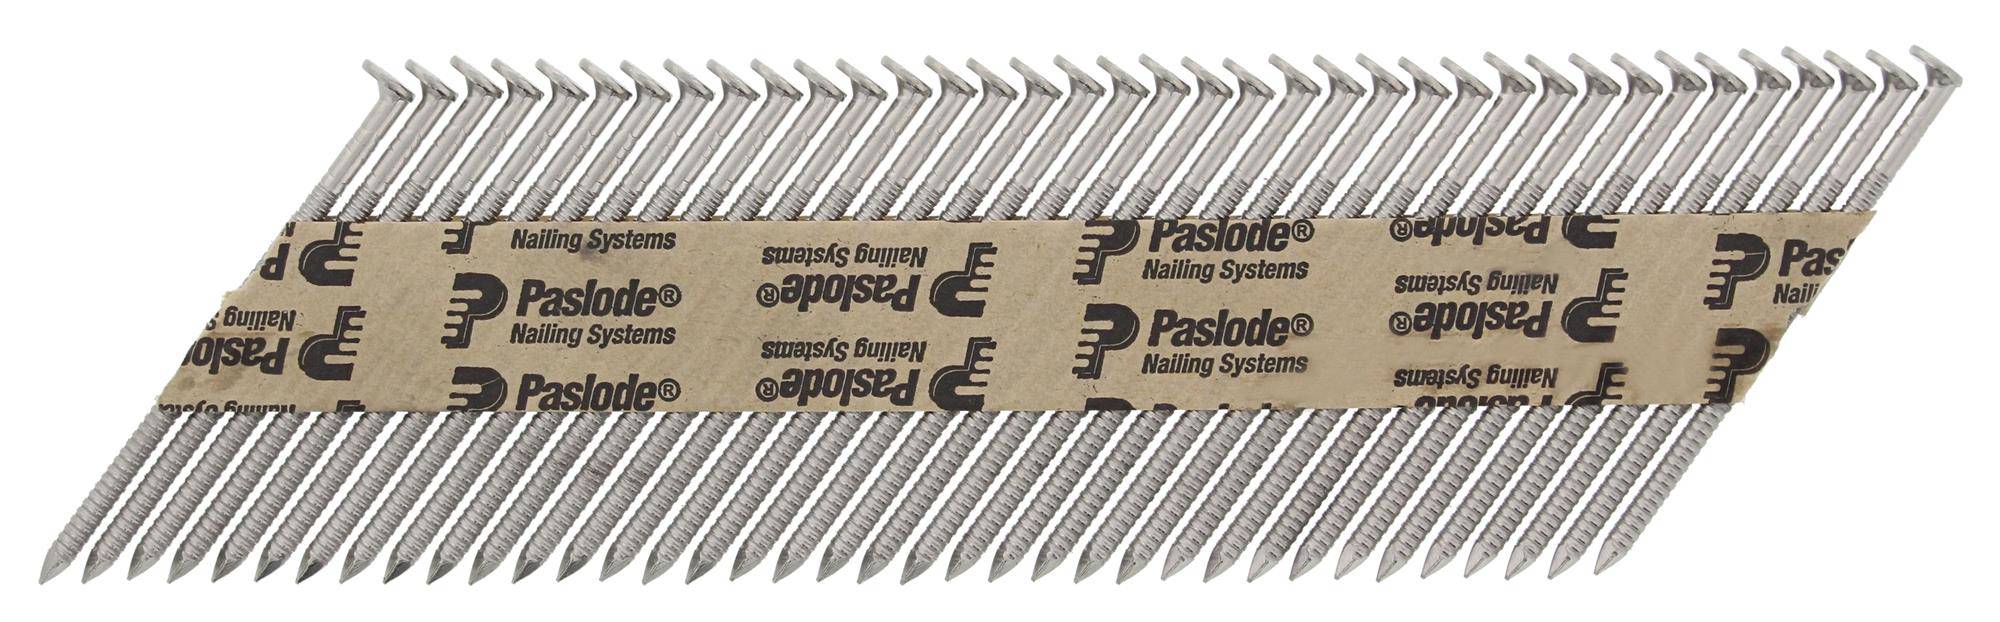 Paslode IM360Ci / 360XI 34 Degree 2.8mm-3.1mm Diameter Paper Collated Nails 51mm-90mm + Fuel Cells - ProNailers